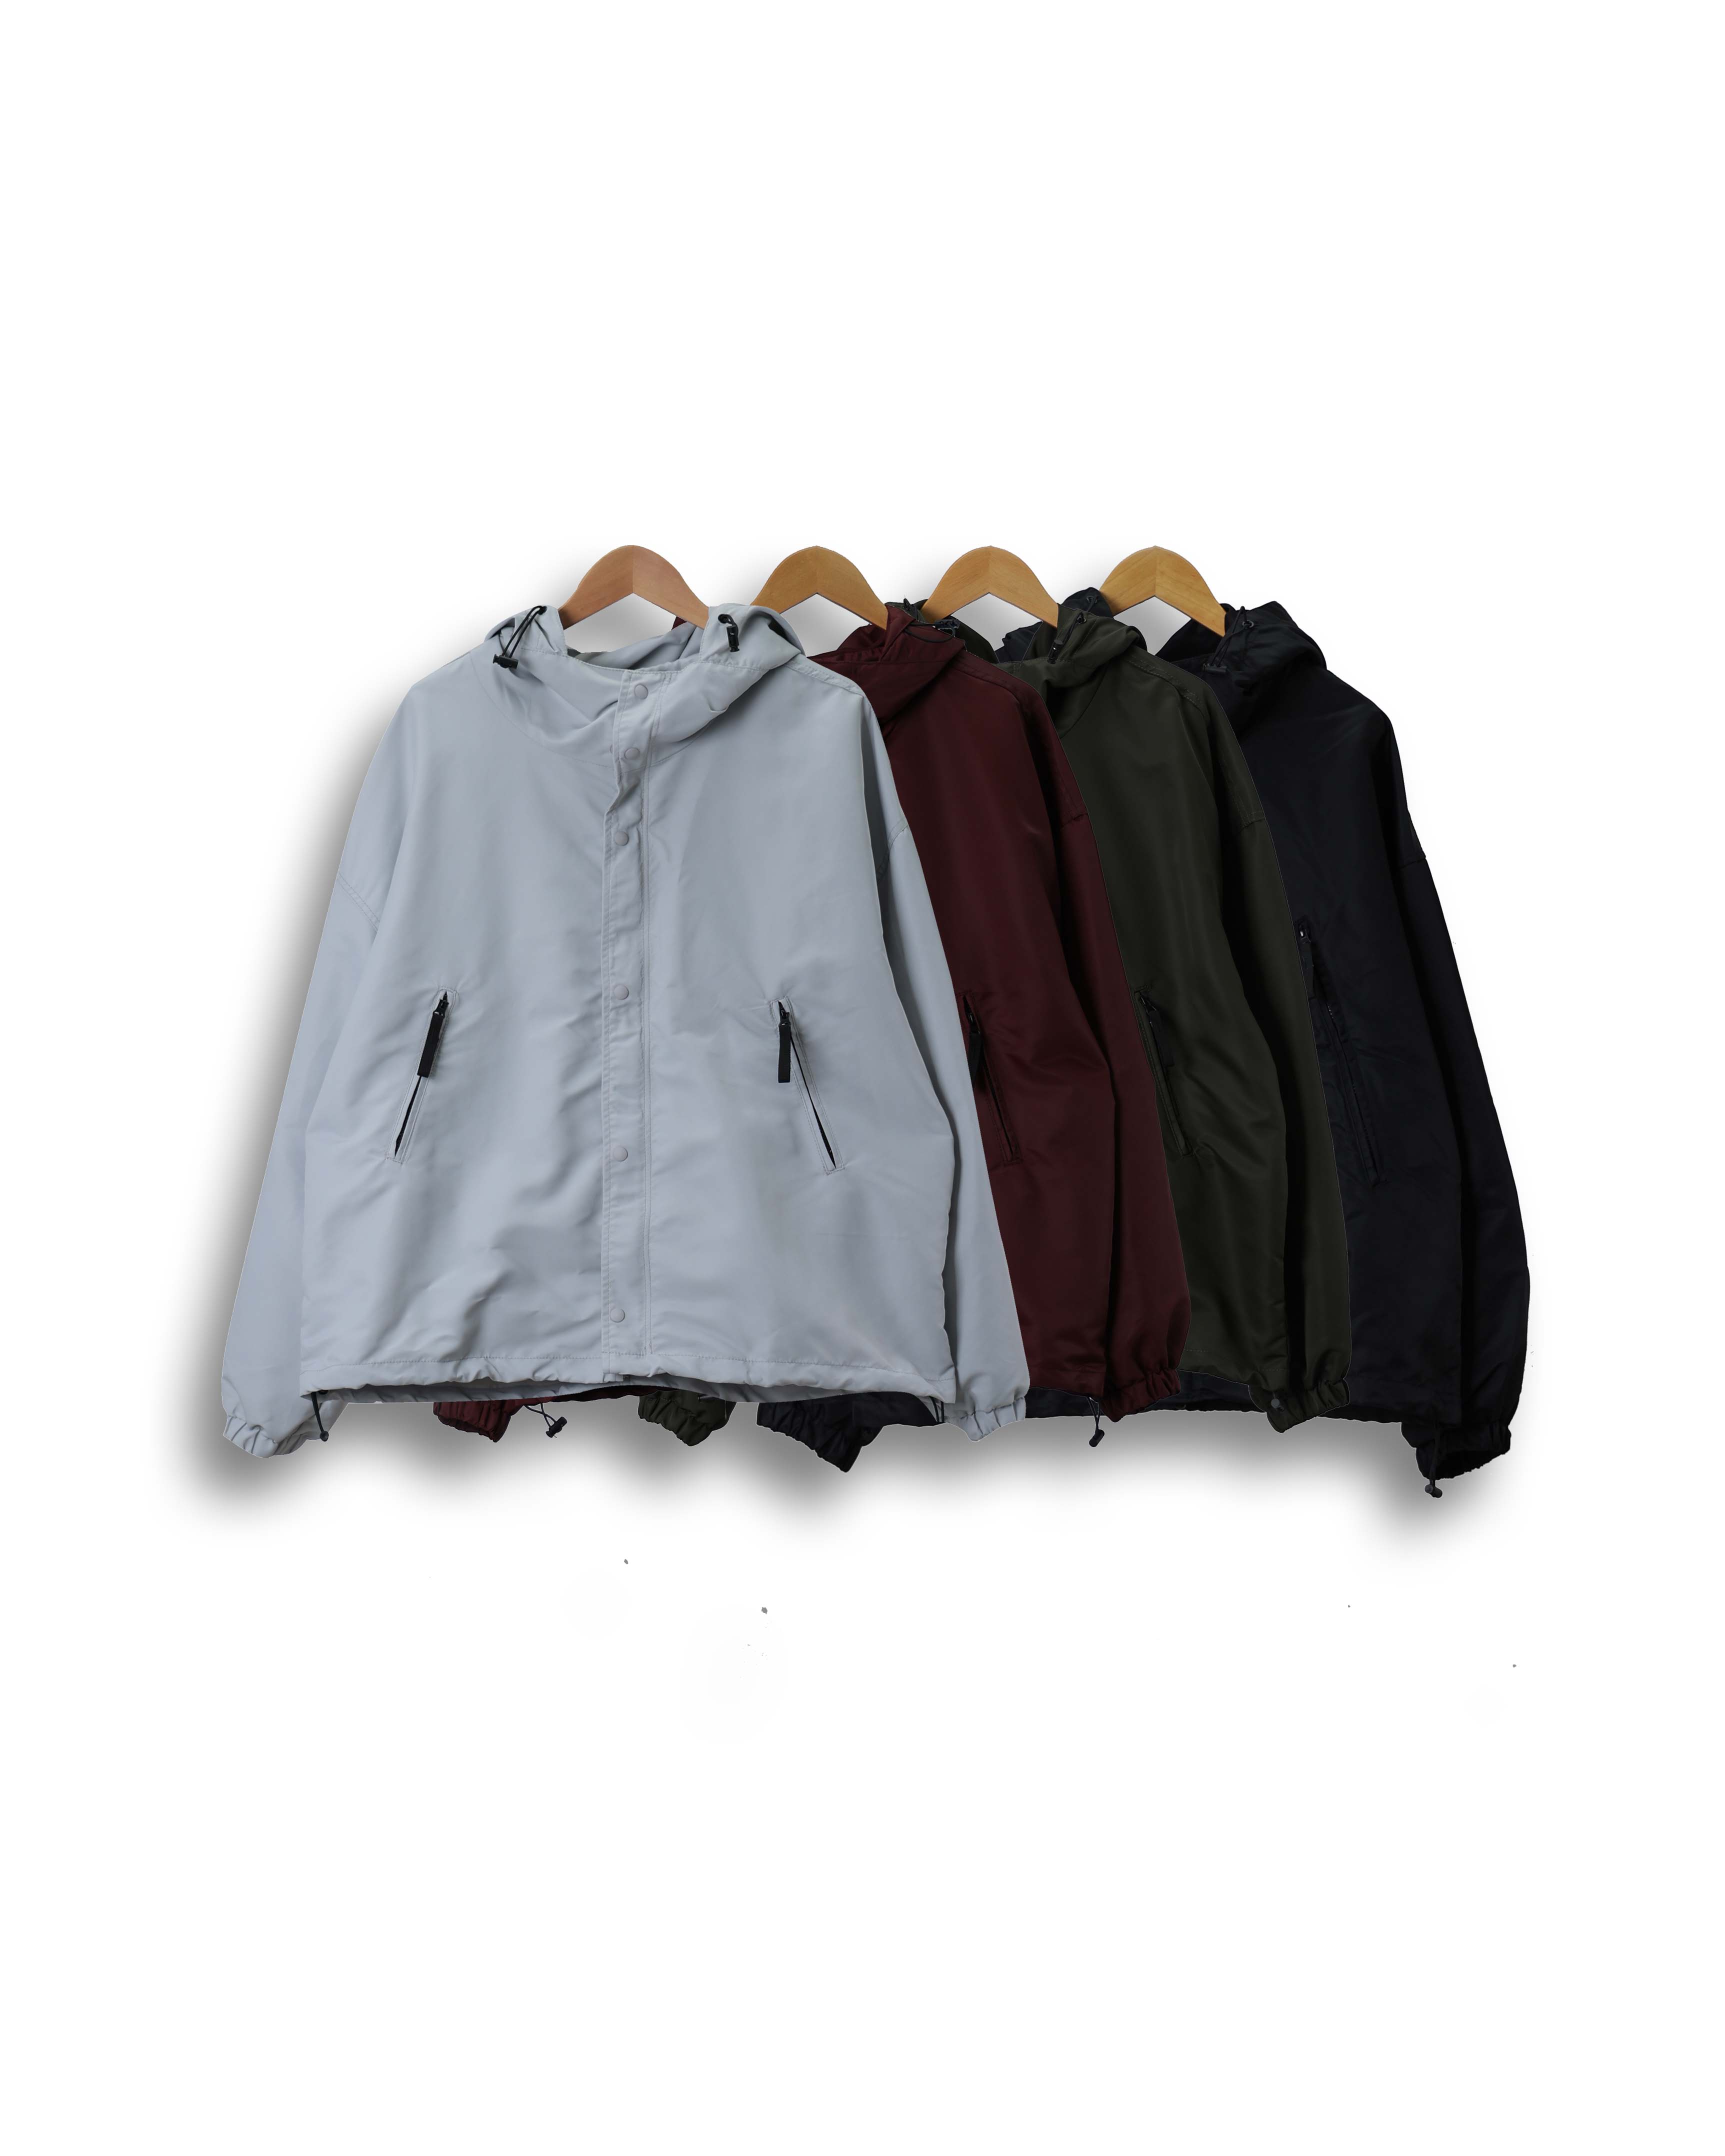 LUSS Paper Daily Over Wind Zip Jacket (Black/Olive/Burgundy/Light Gray)